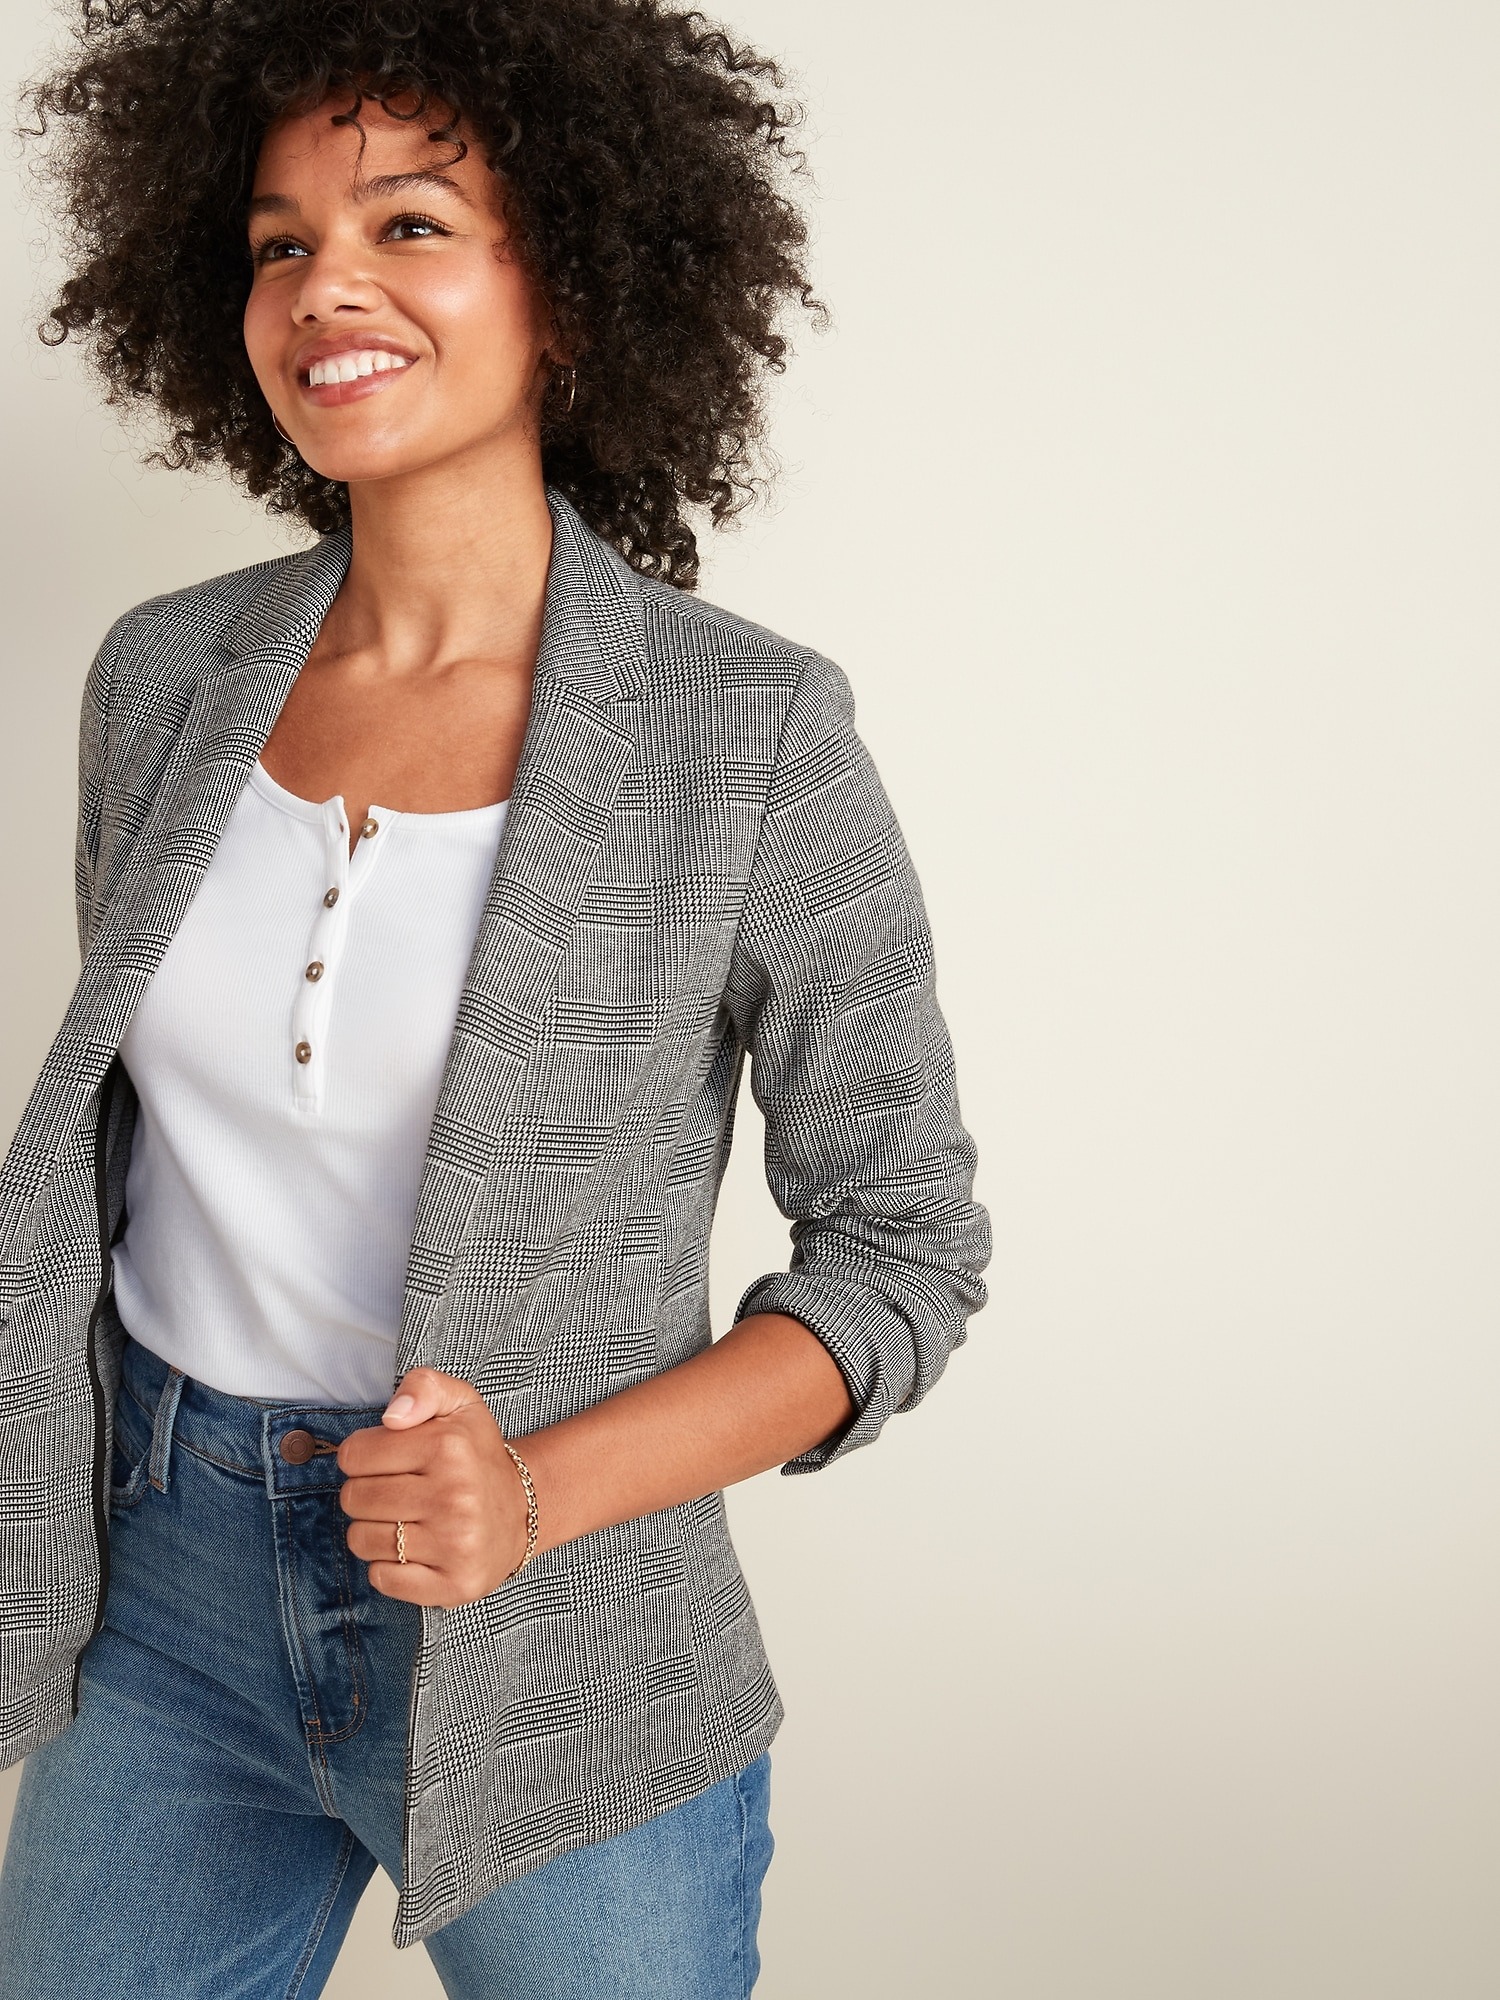 How to Wear an Old Navy Blazer